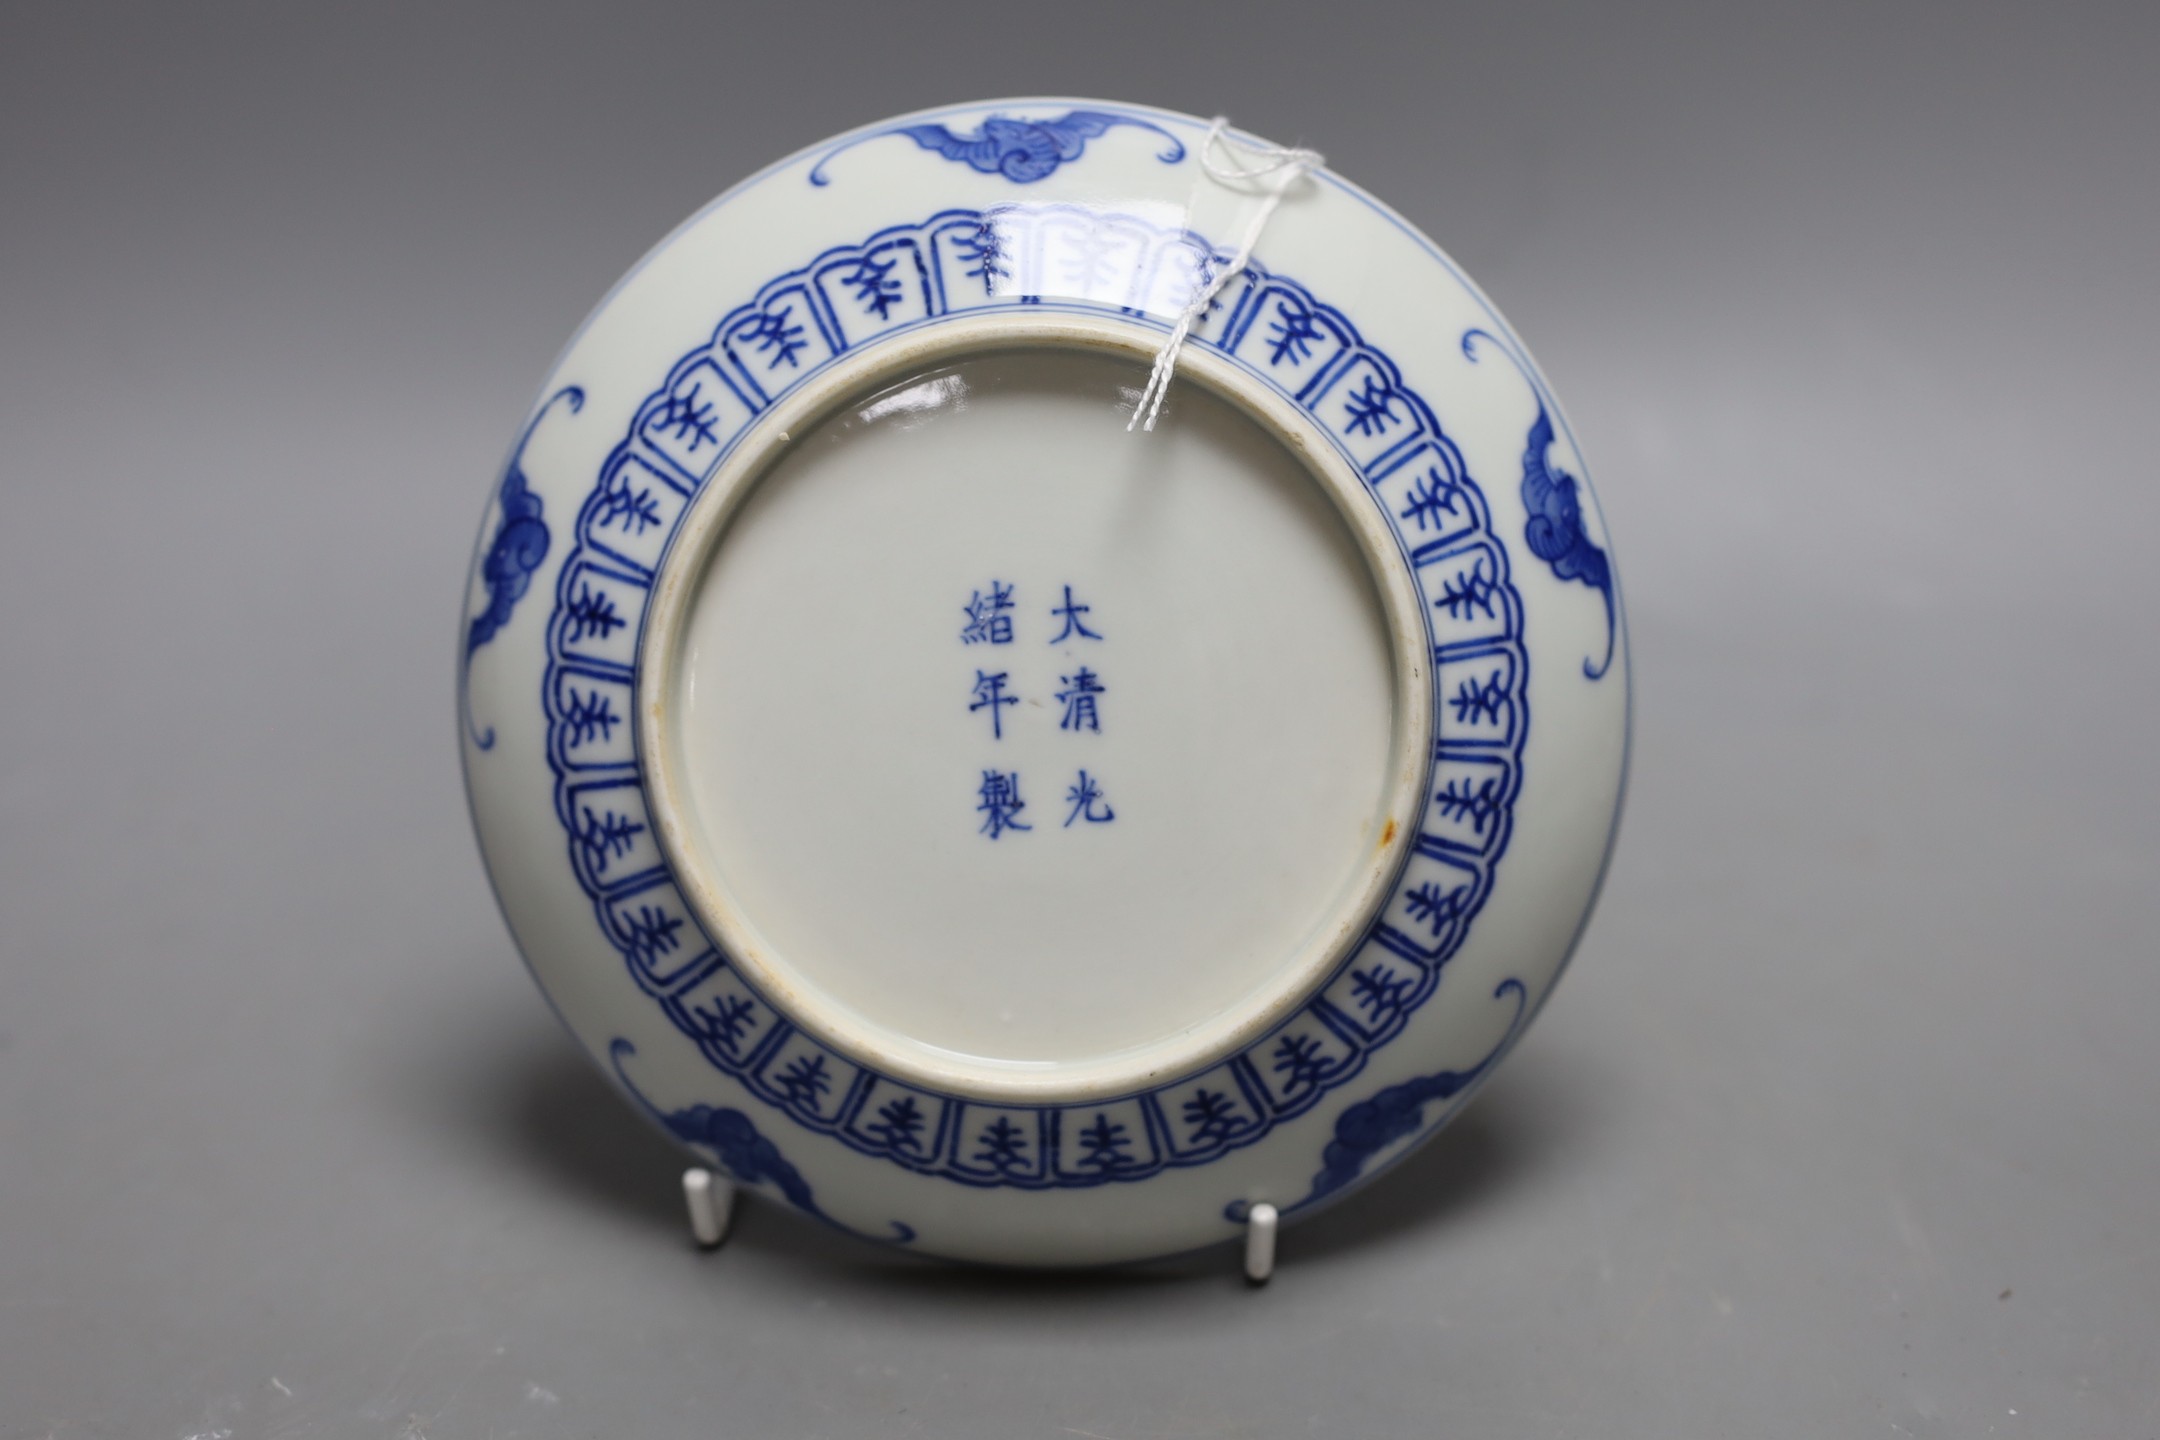 A Chinese blue and white ‘dragon’ plate. 17cm diameter